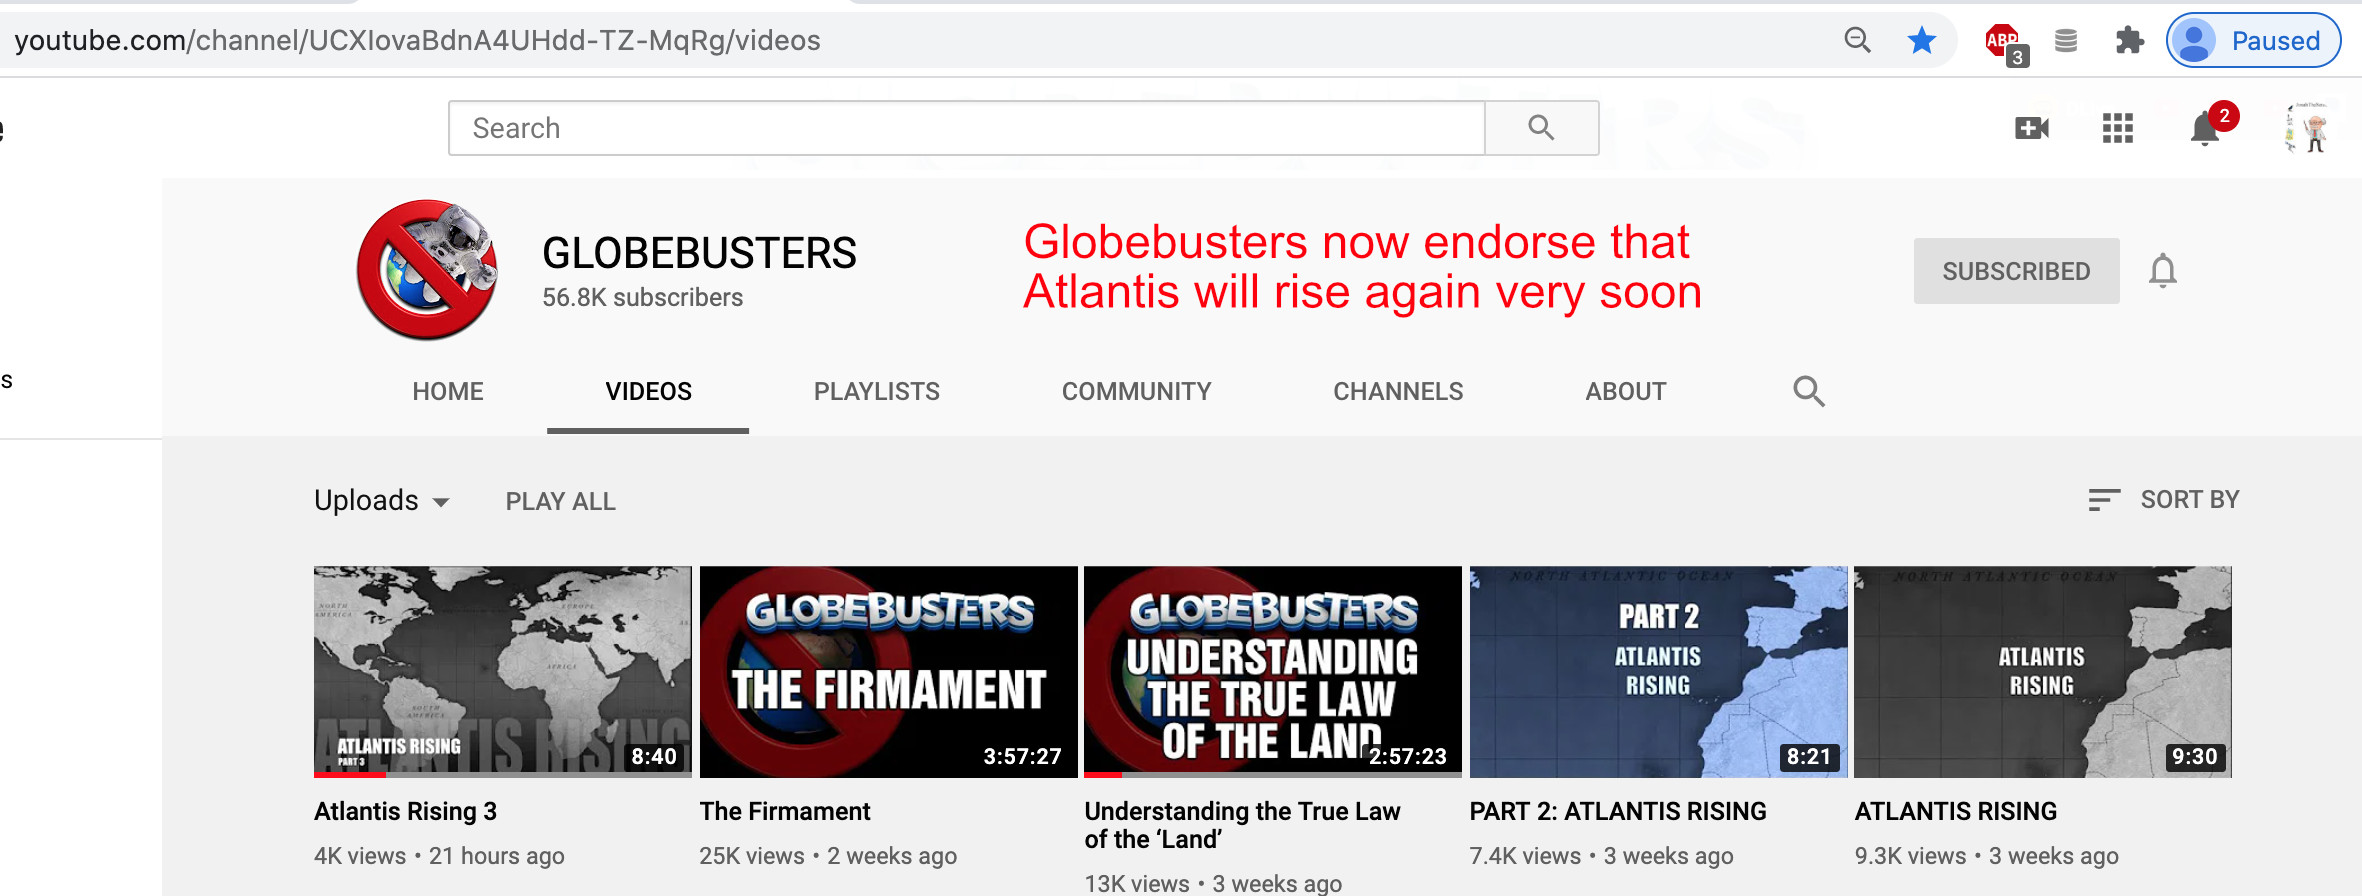 Globebusters now endorse that Atlantis will rise again very soon .jpg